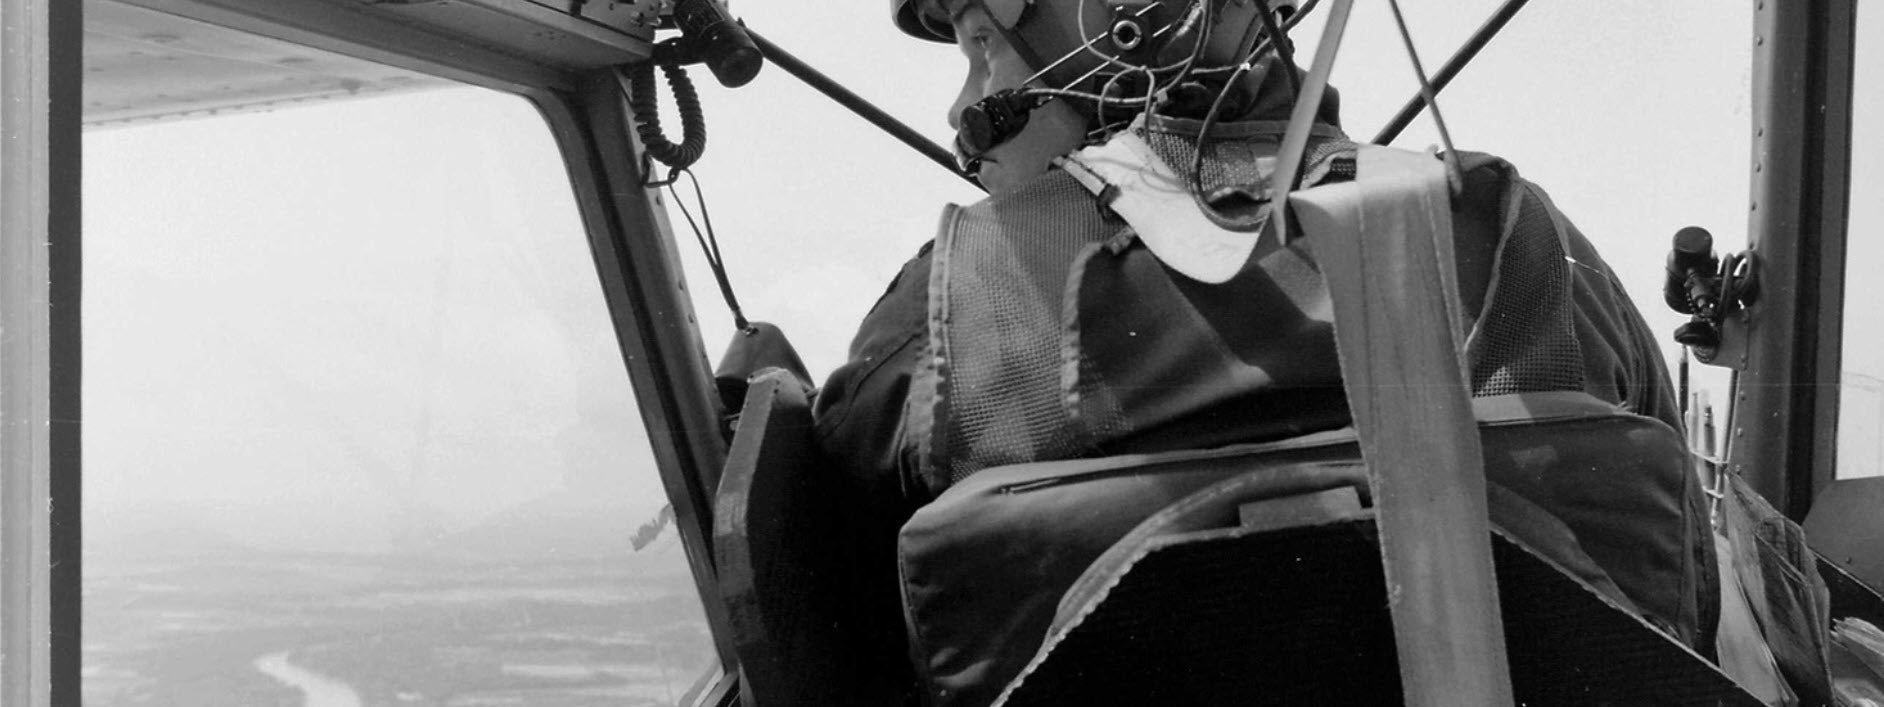 O-1 Bird Dog in flight with pilot searching for the enemy in Vietnam.